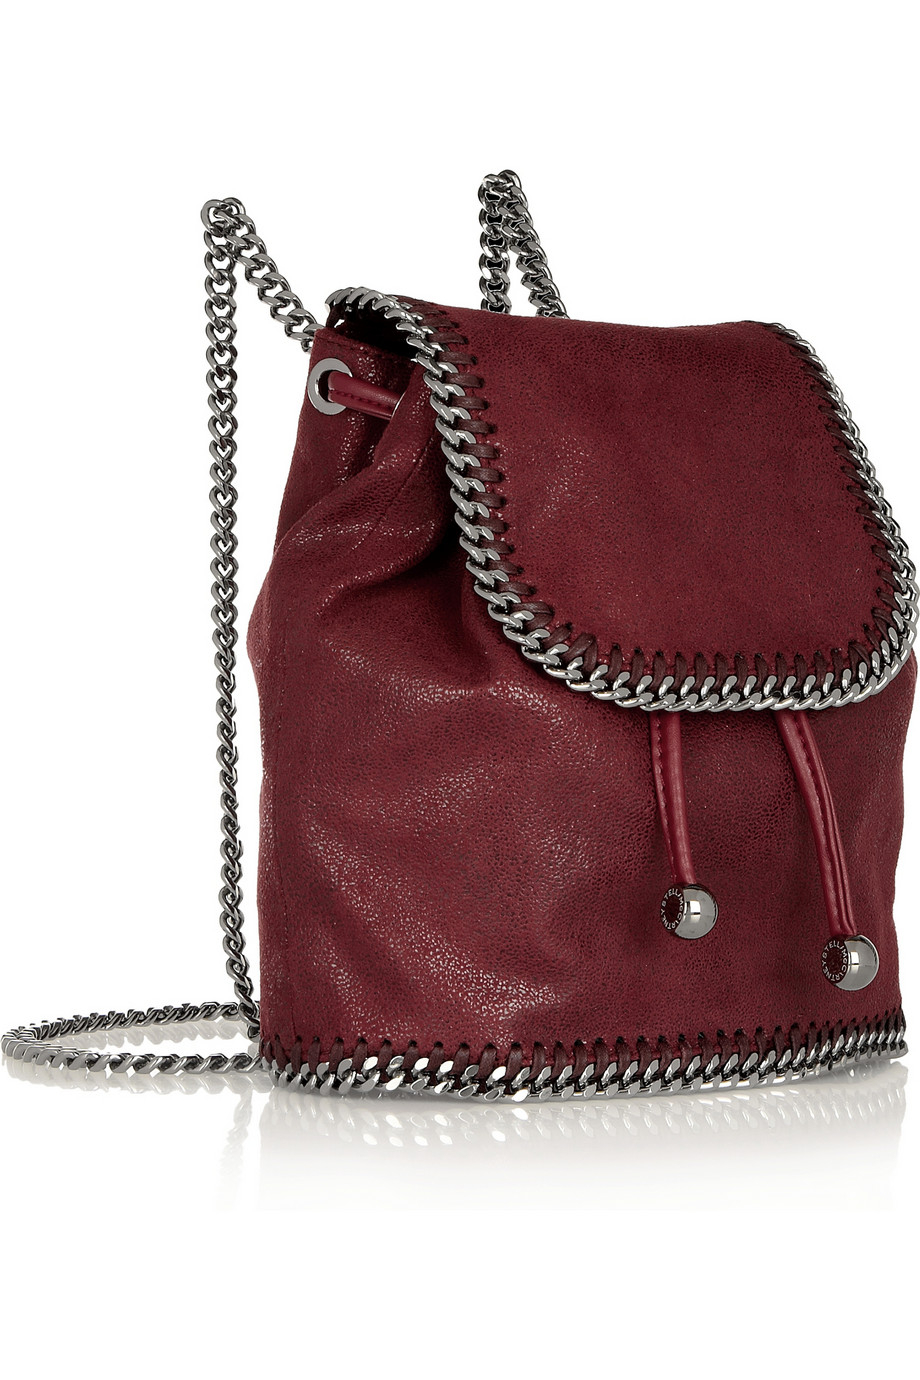 Stella McCartney The Falabella Mini Faux Brushedleather Backpack in Red |  Lyst